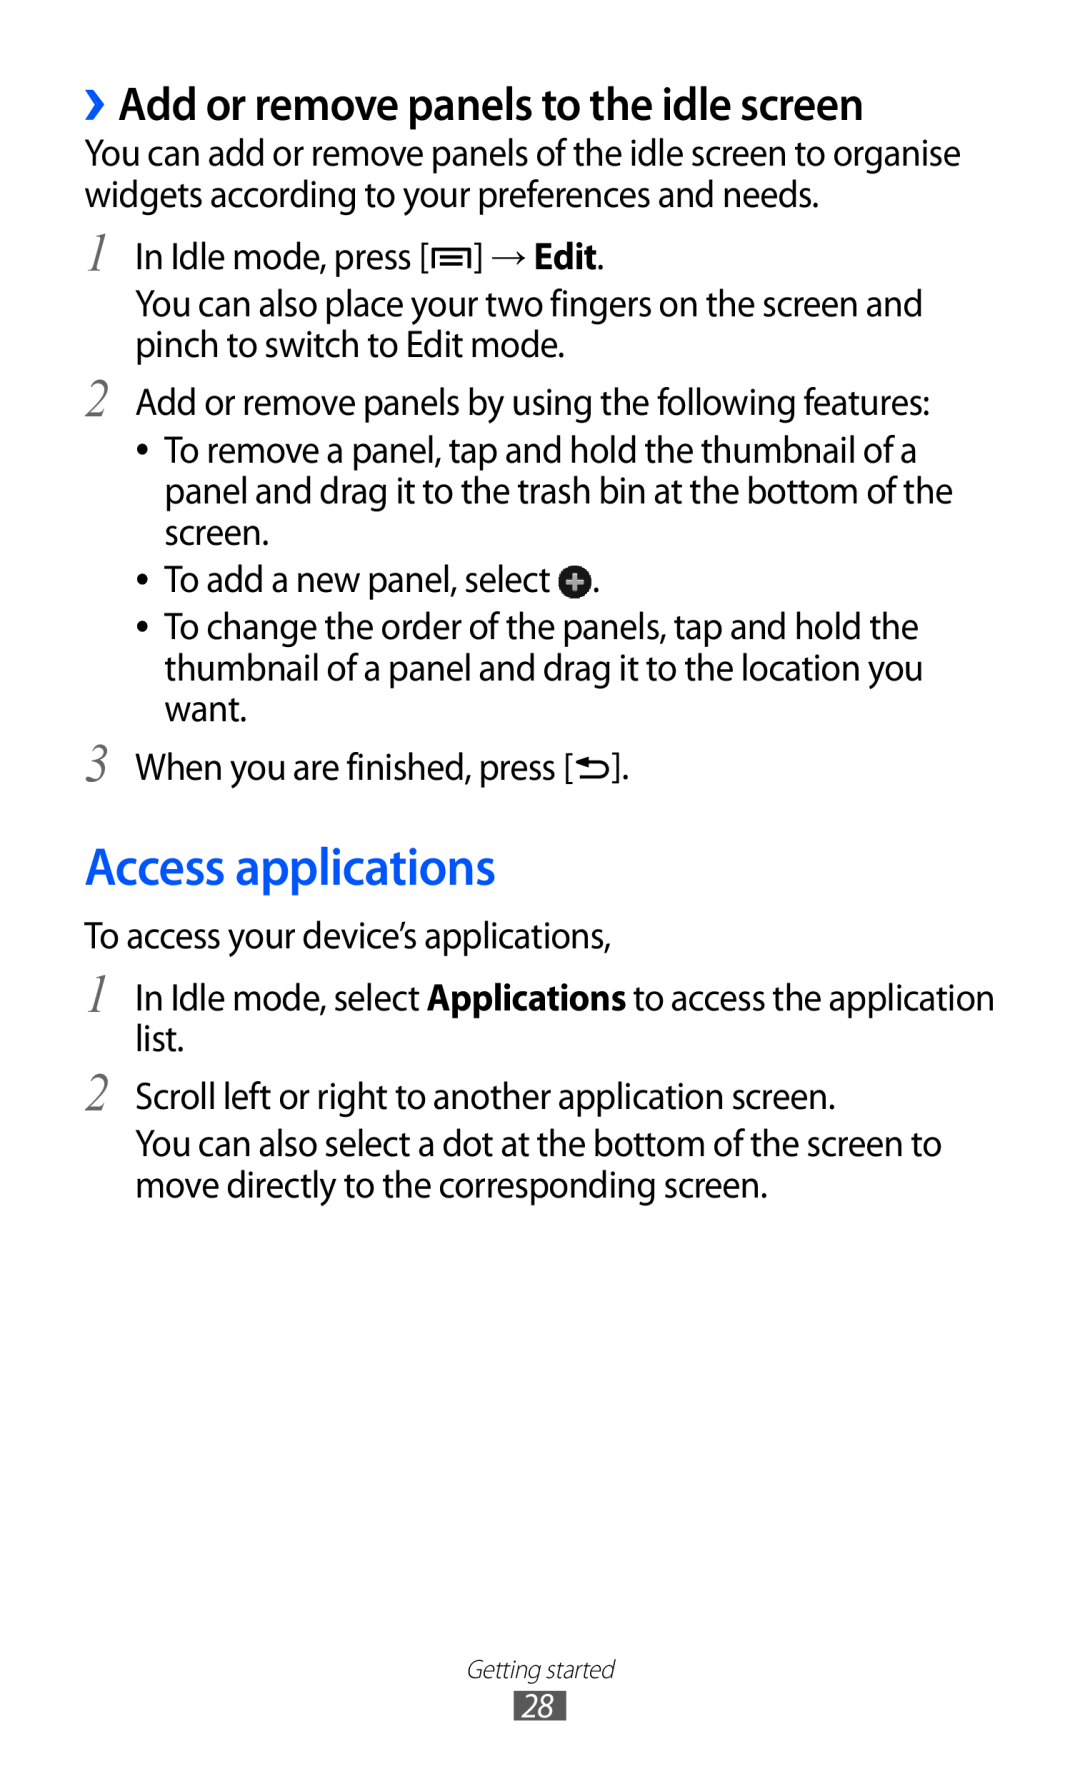 Samsung GT-I9070 user manual Access applications, ››Add or remove panels to the idle screen 